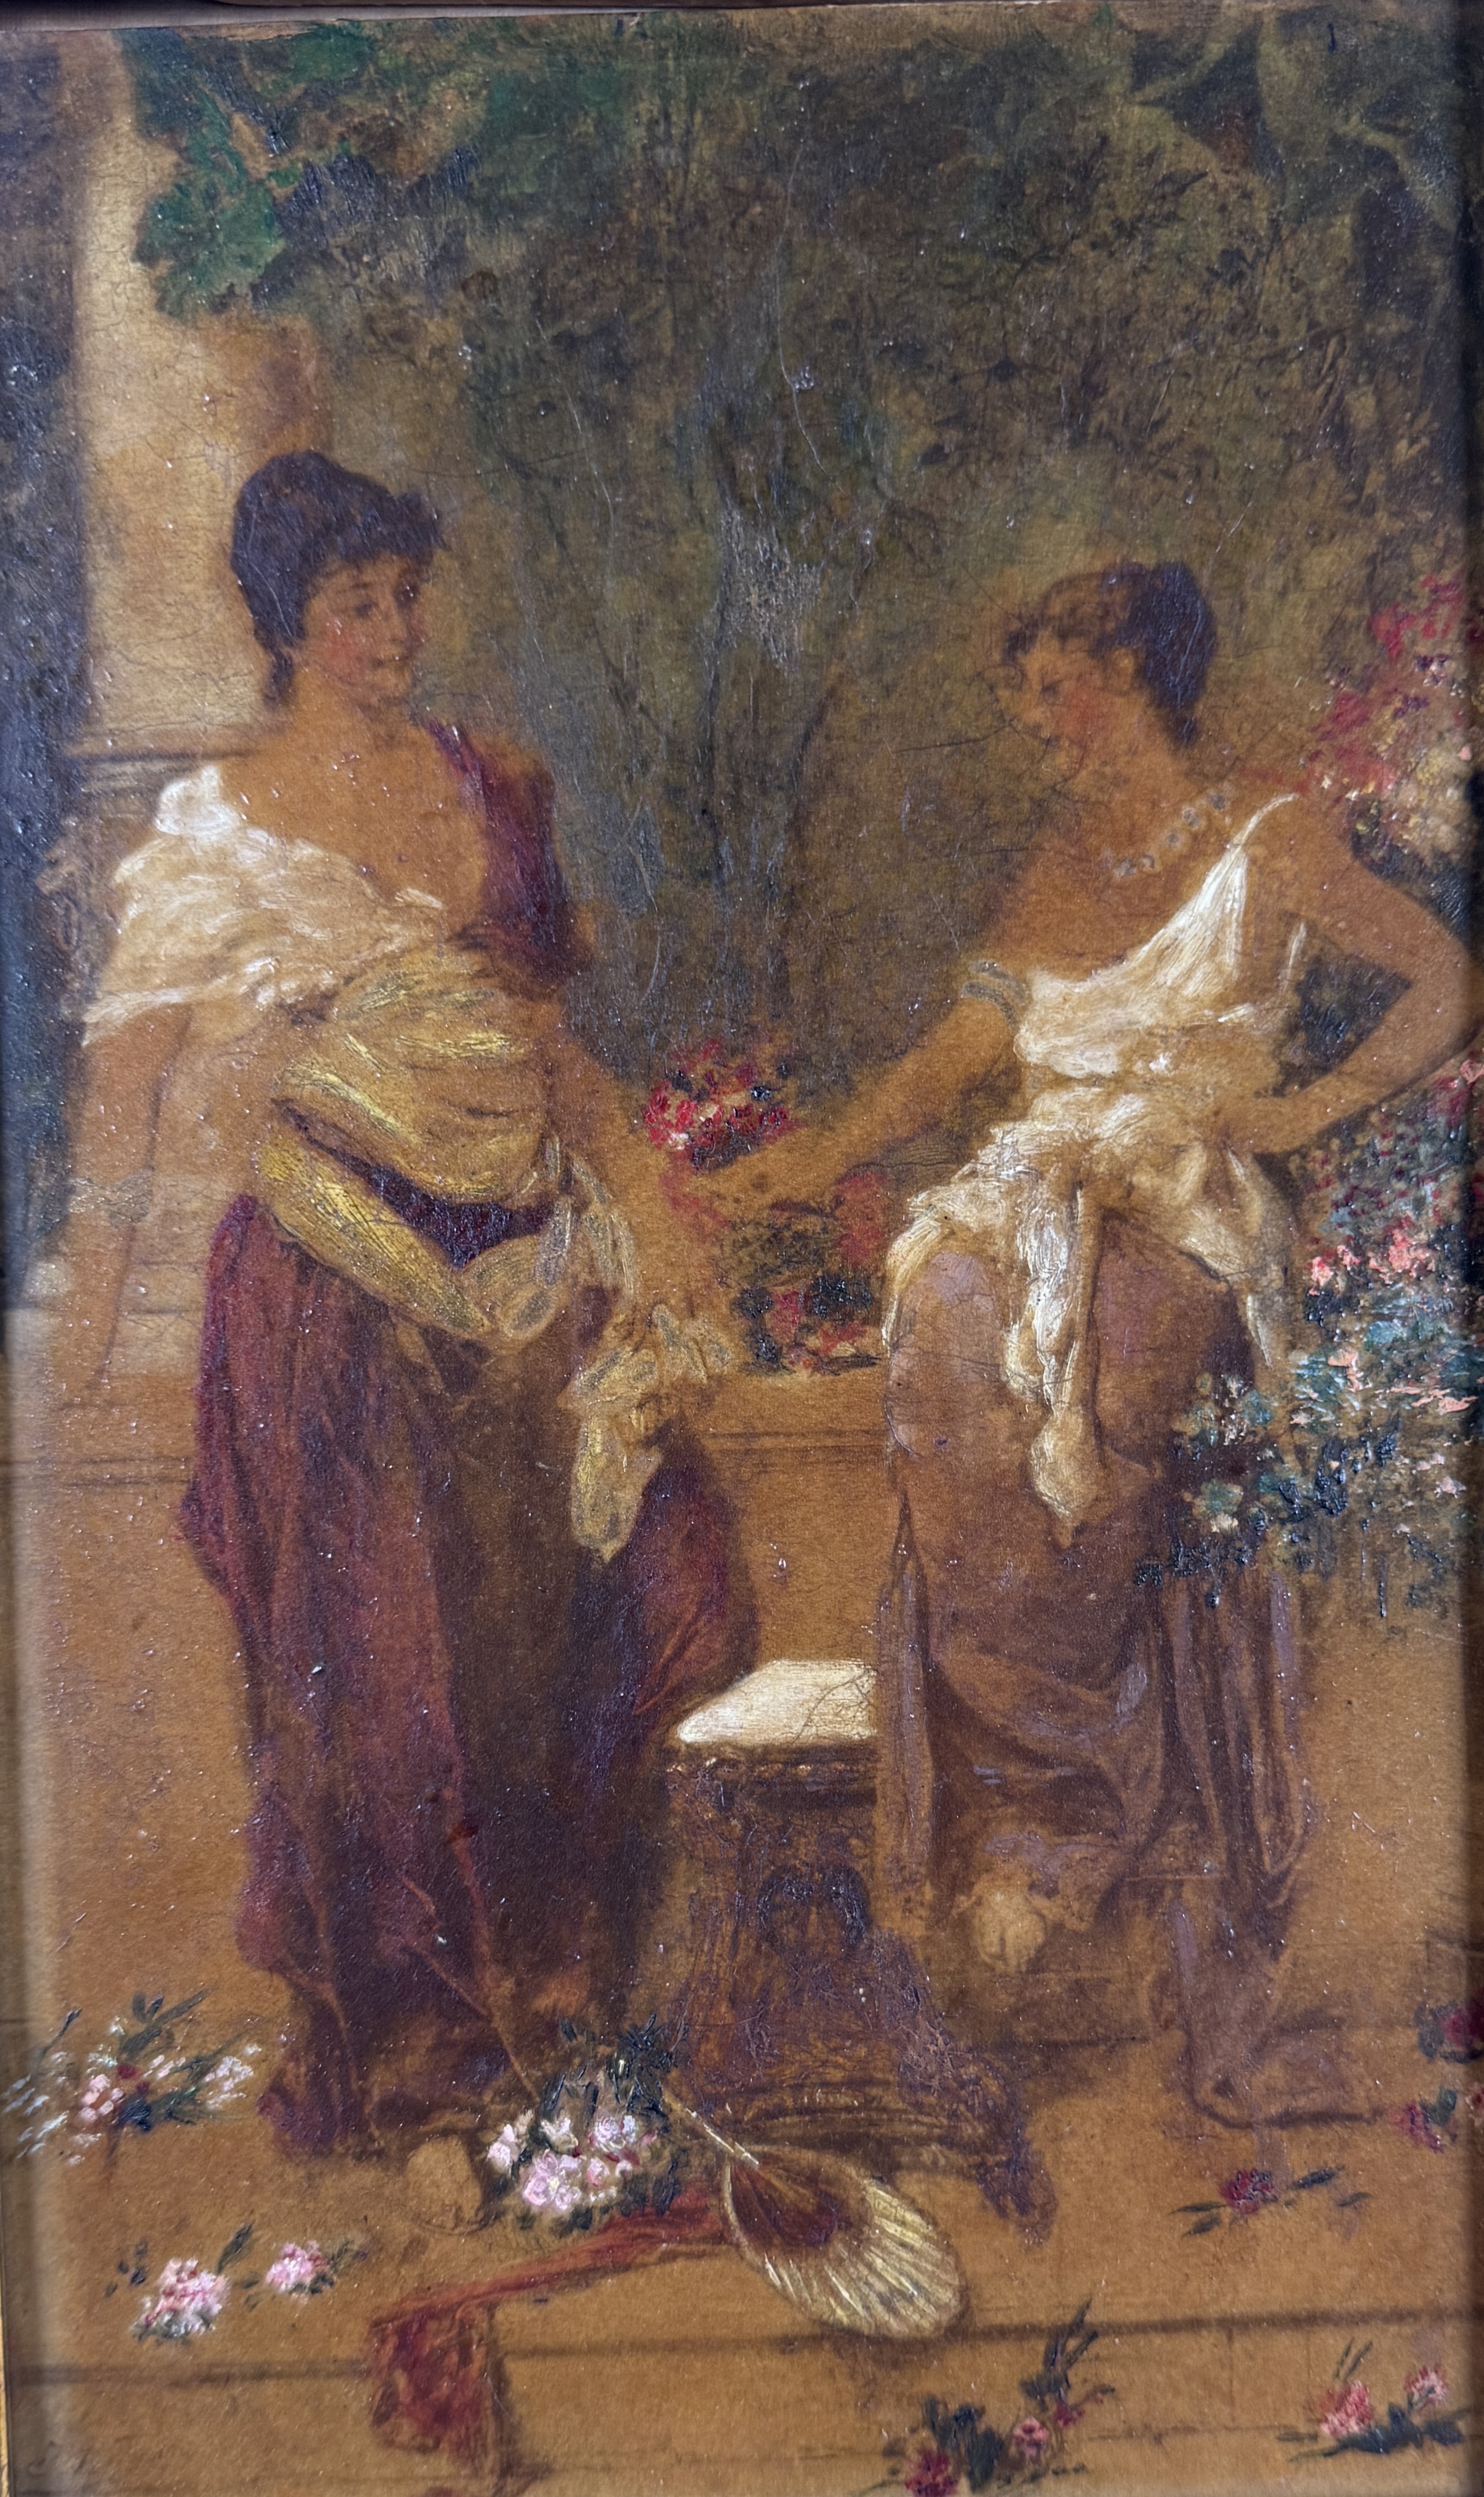 Late 19th century Italian school, Study of two young women - Image 2 of 3